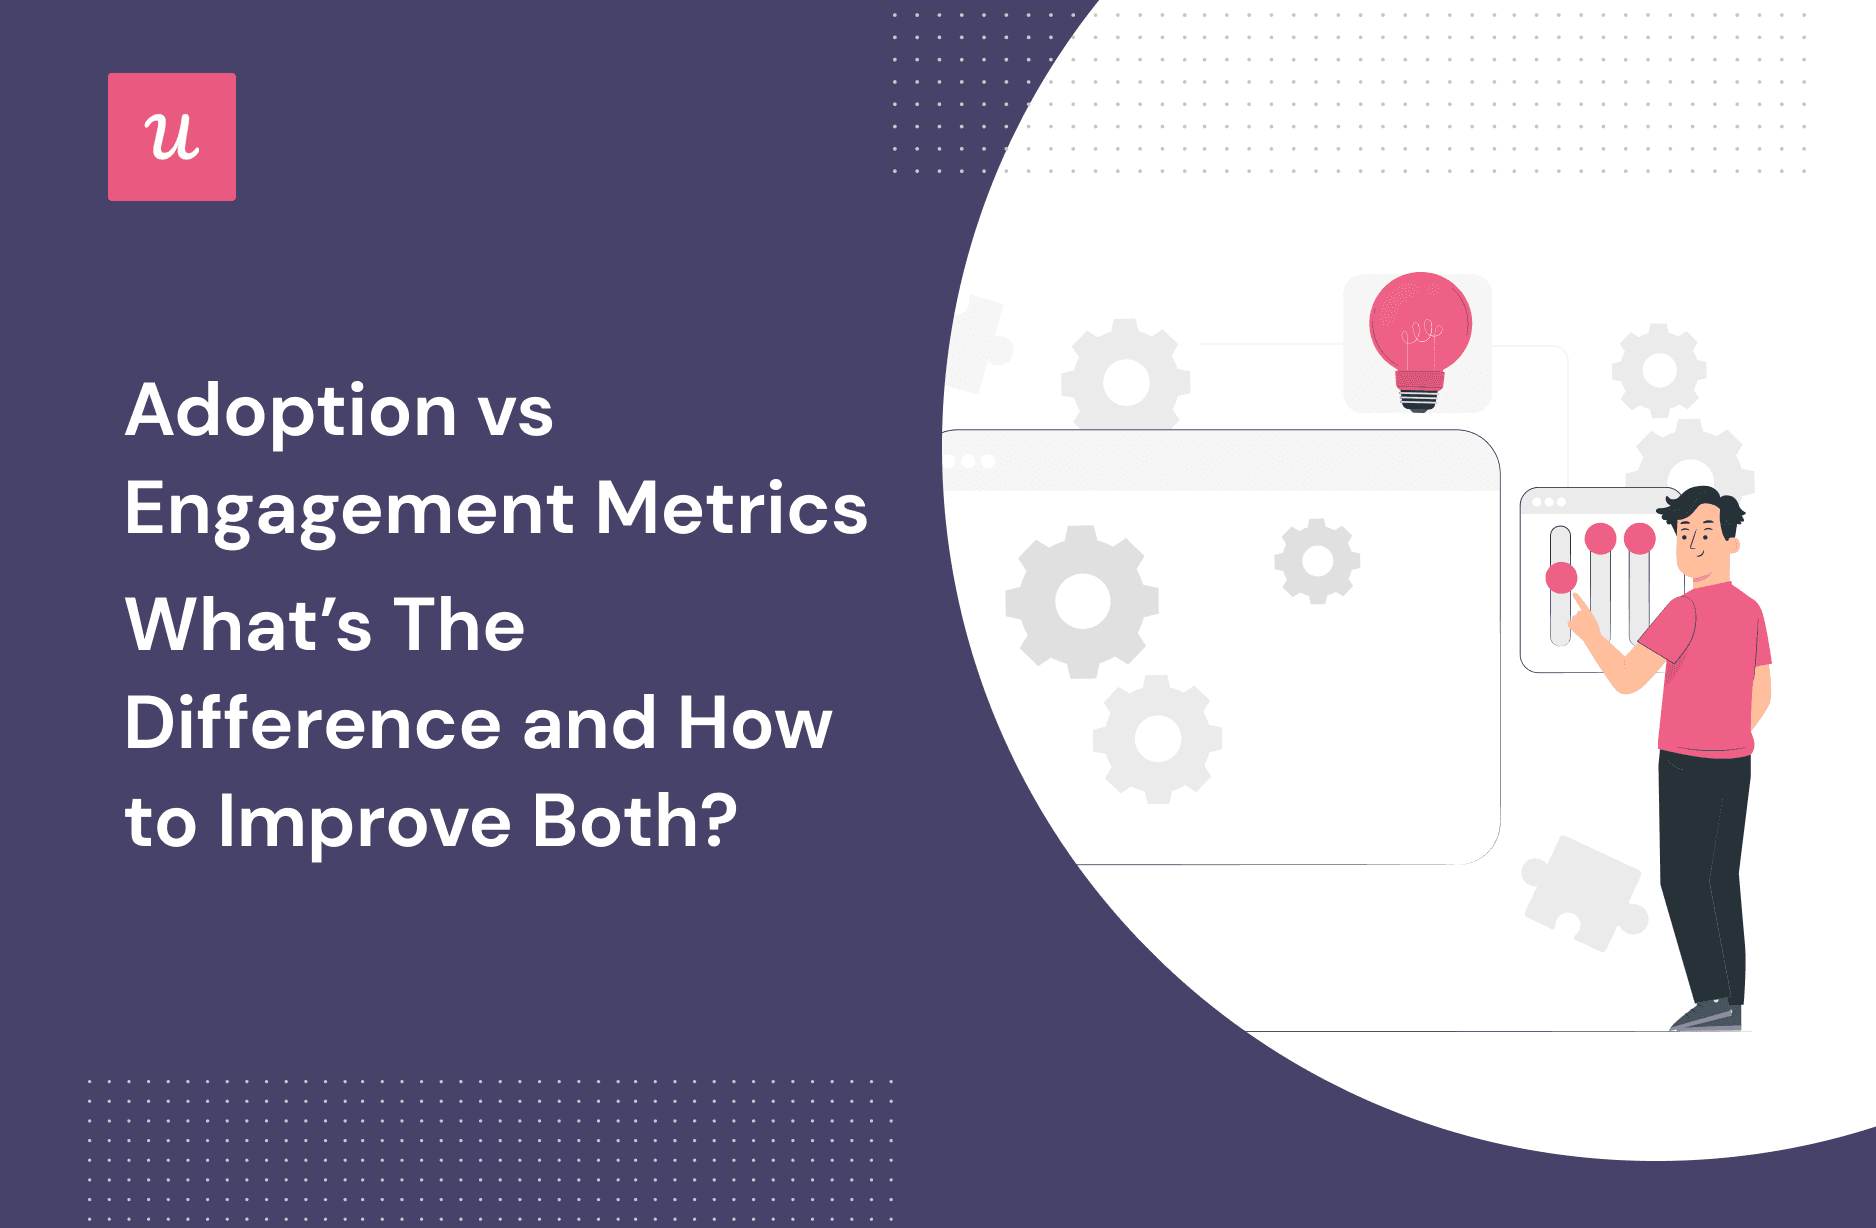 Adoption vs Engagement Metrics: What’s the Difference and How To Improve Both?